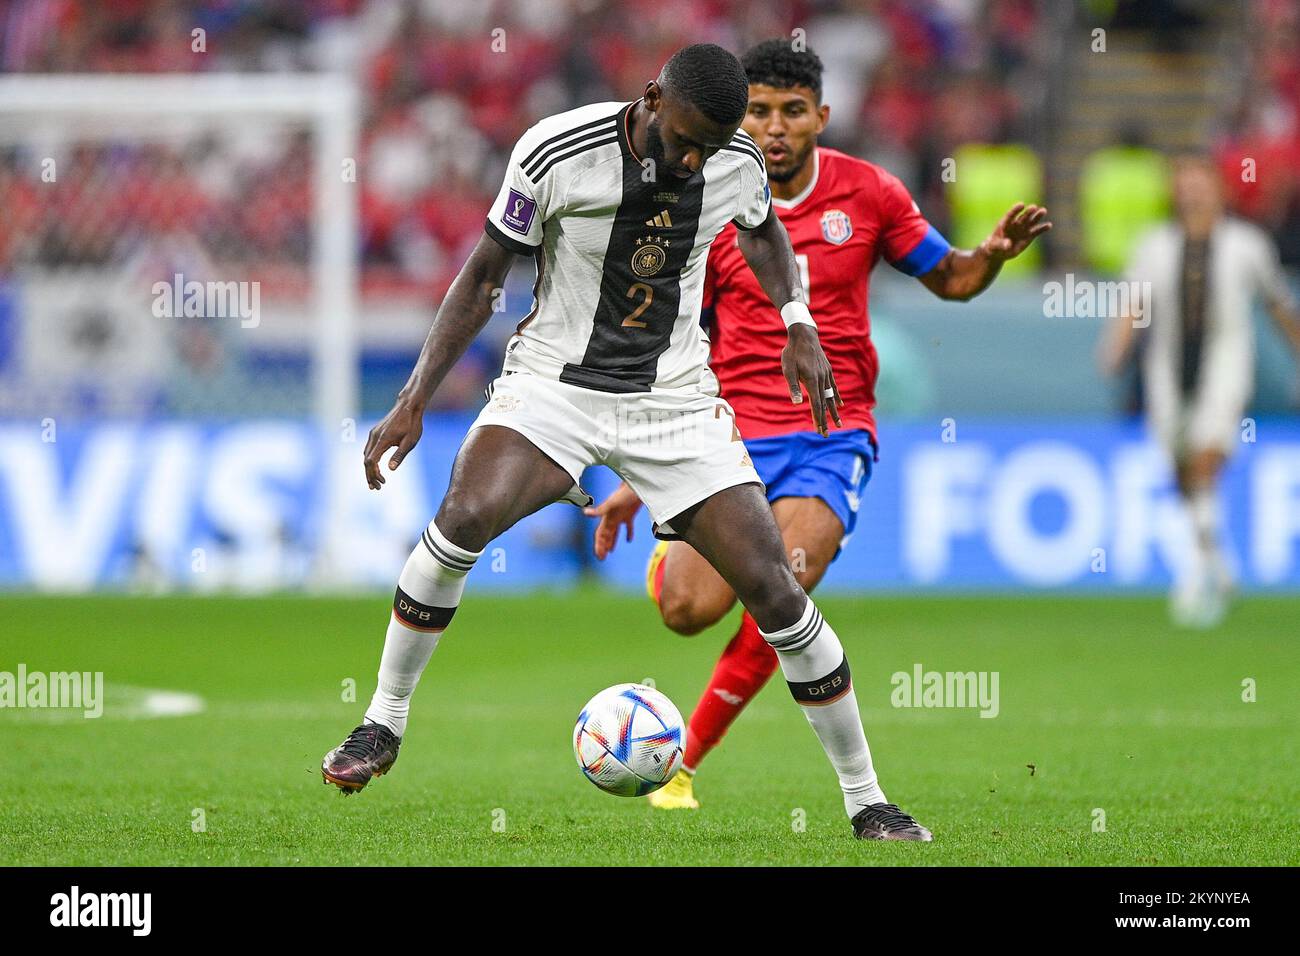 AL KHOR, QATAR - DECEMBER 1: Antonio Ruediger of Germany during the Group E - FIFA World Cup Qatar 2022 match between Costa Rica and Germany at the Al Bayt Stadium on December 1, 2022 in Al Khor, Qatar (Photo by Pablo Morano/BSR Agency) Stock Photo